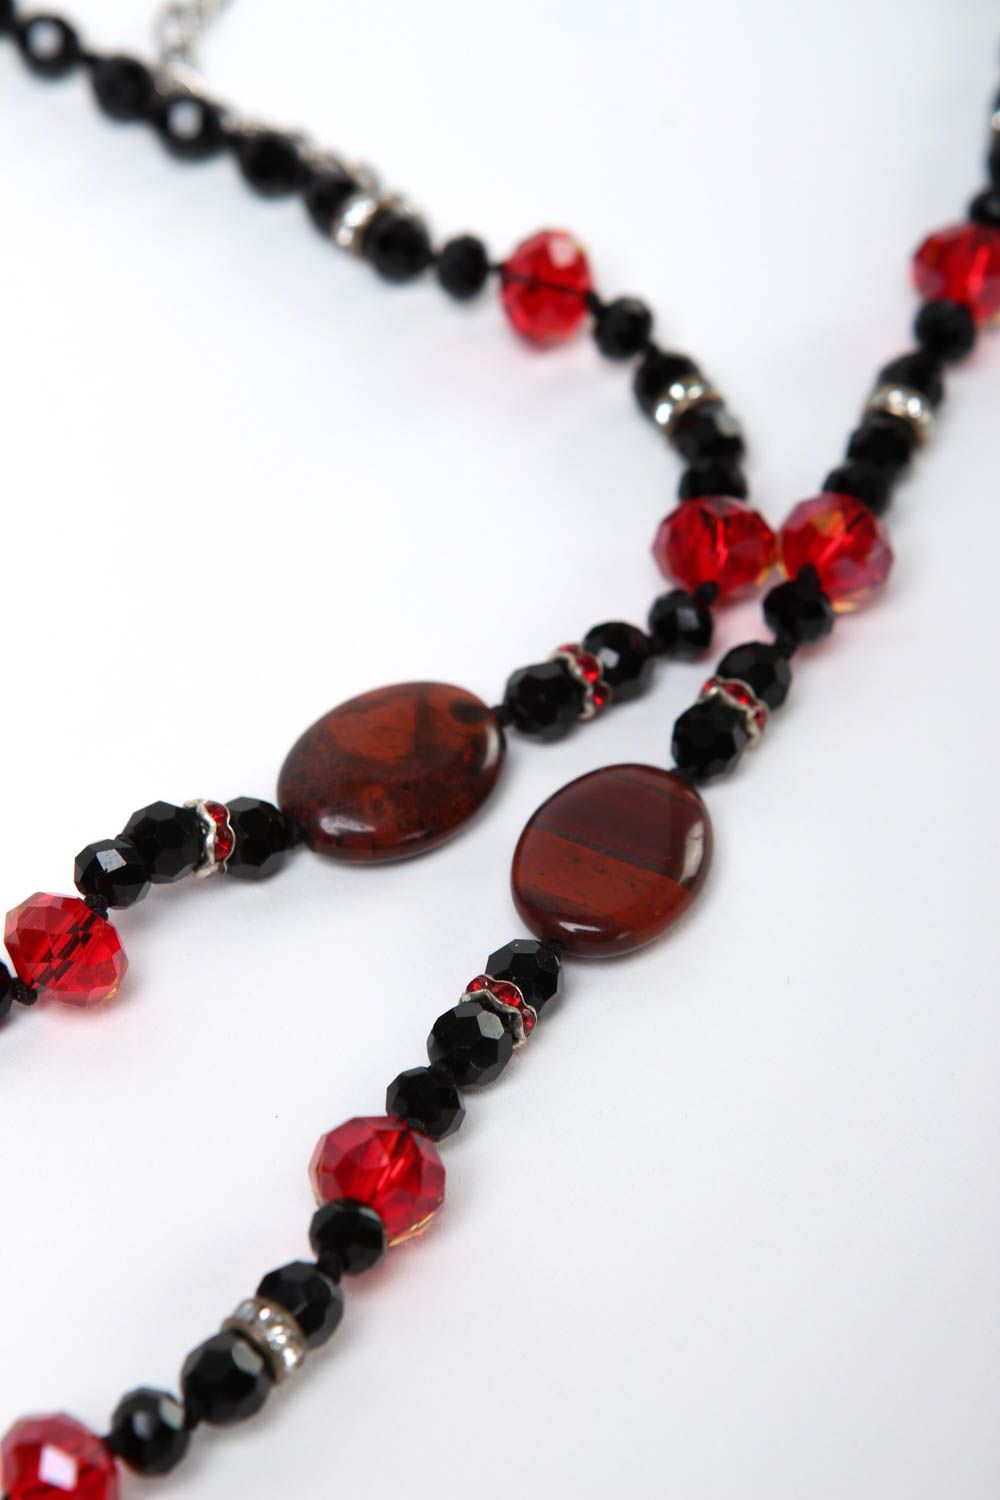 Stylish handmade beaded necklace gemstone bead necklace design gifts for her photo 3